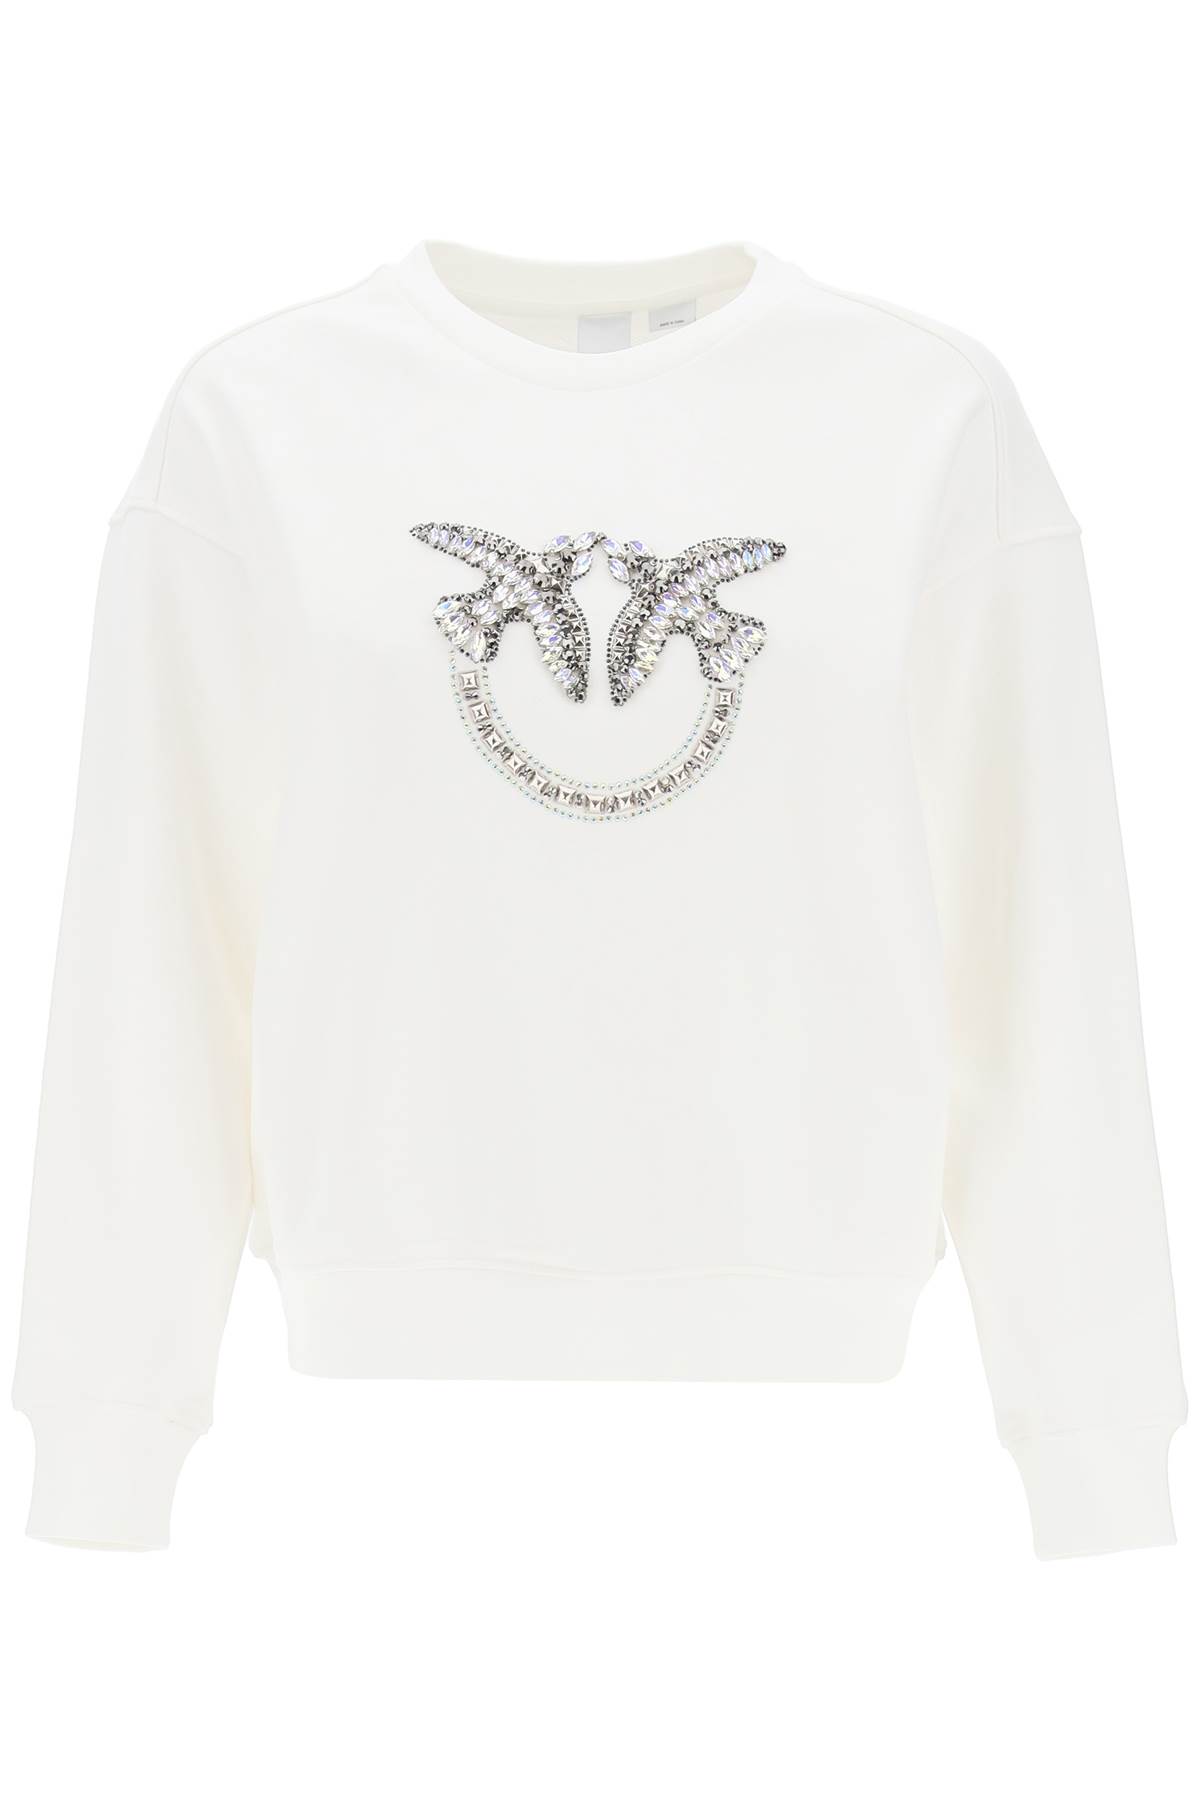 Nelly Sweatshirt With Love Birds Embroidery